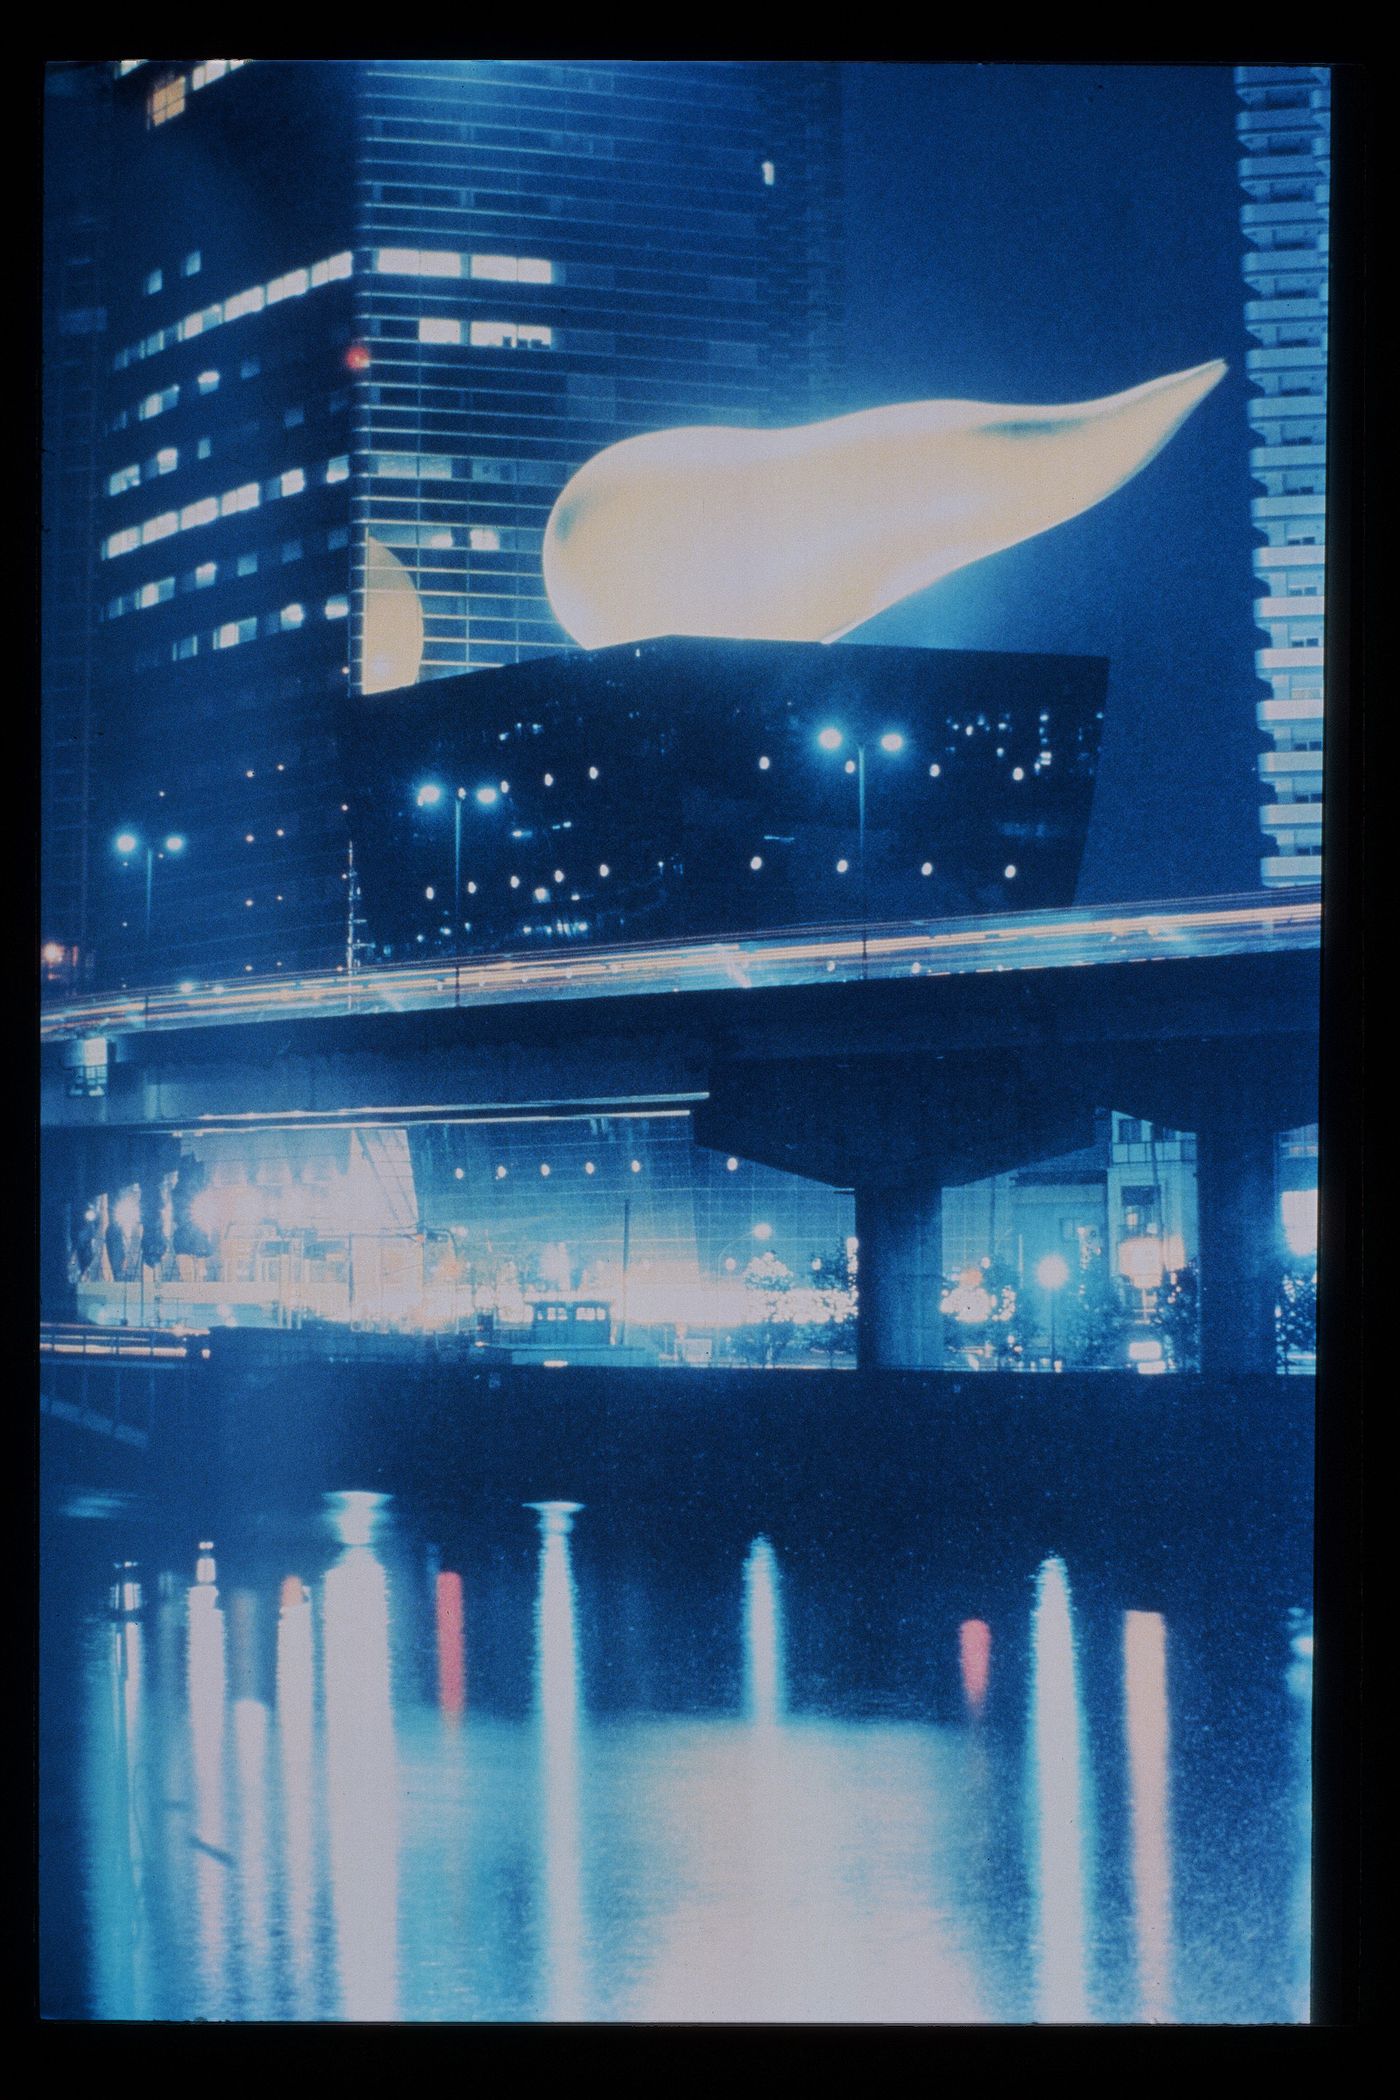 Slide of a photograph of Asahi Superdry Hall, Tokyo, by Philippe Starck